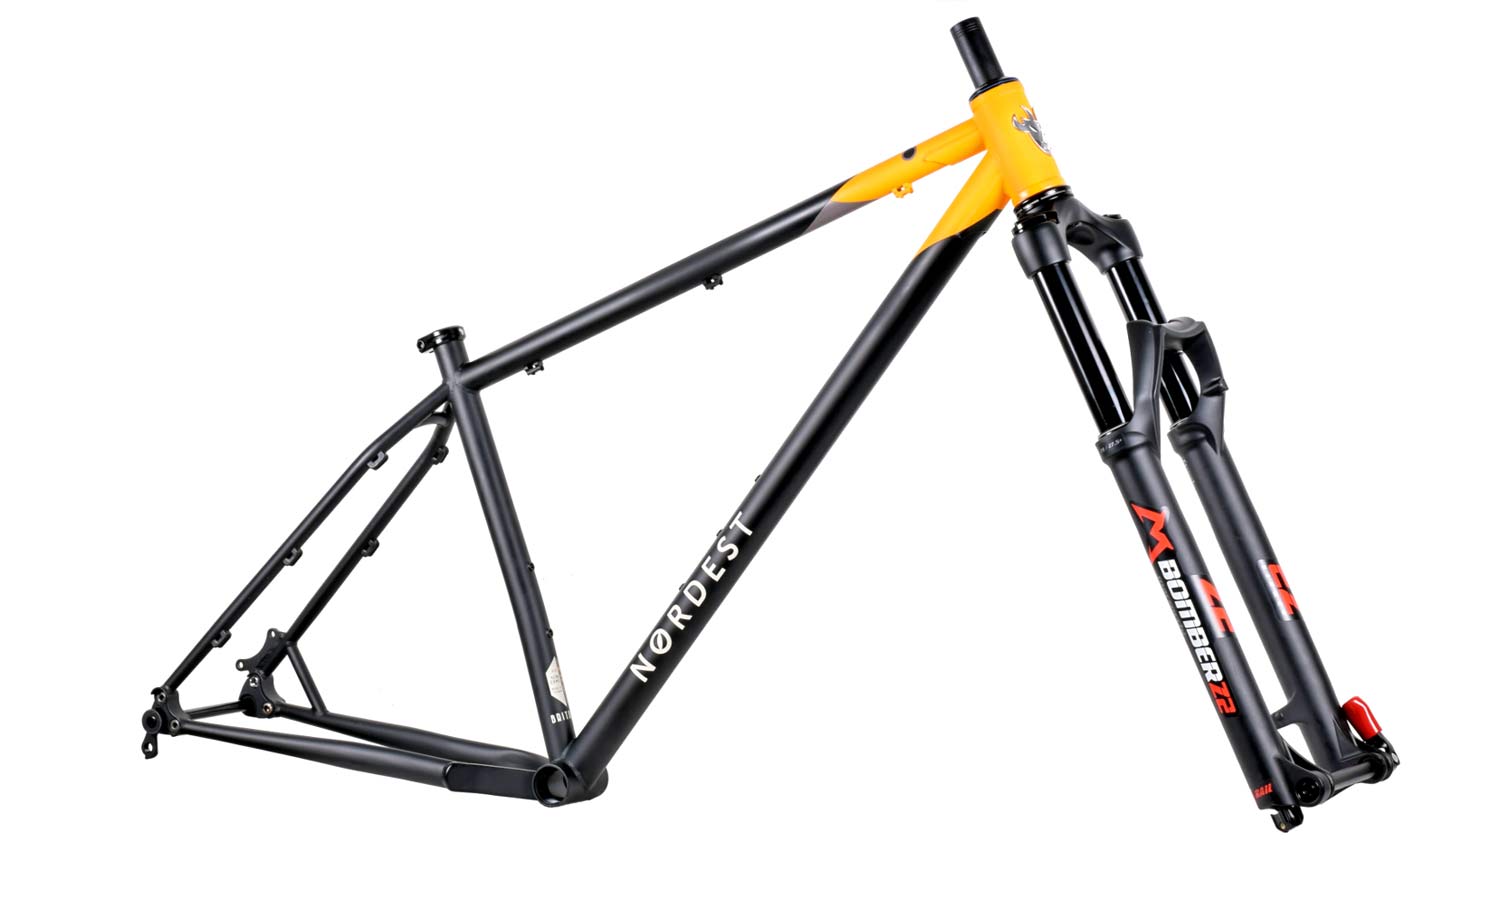 Nordest Britango TR steel trail hardtail, affordable 4130 chromoly steel mountain bike hardtail frame for TRail or XC